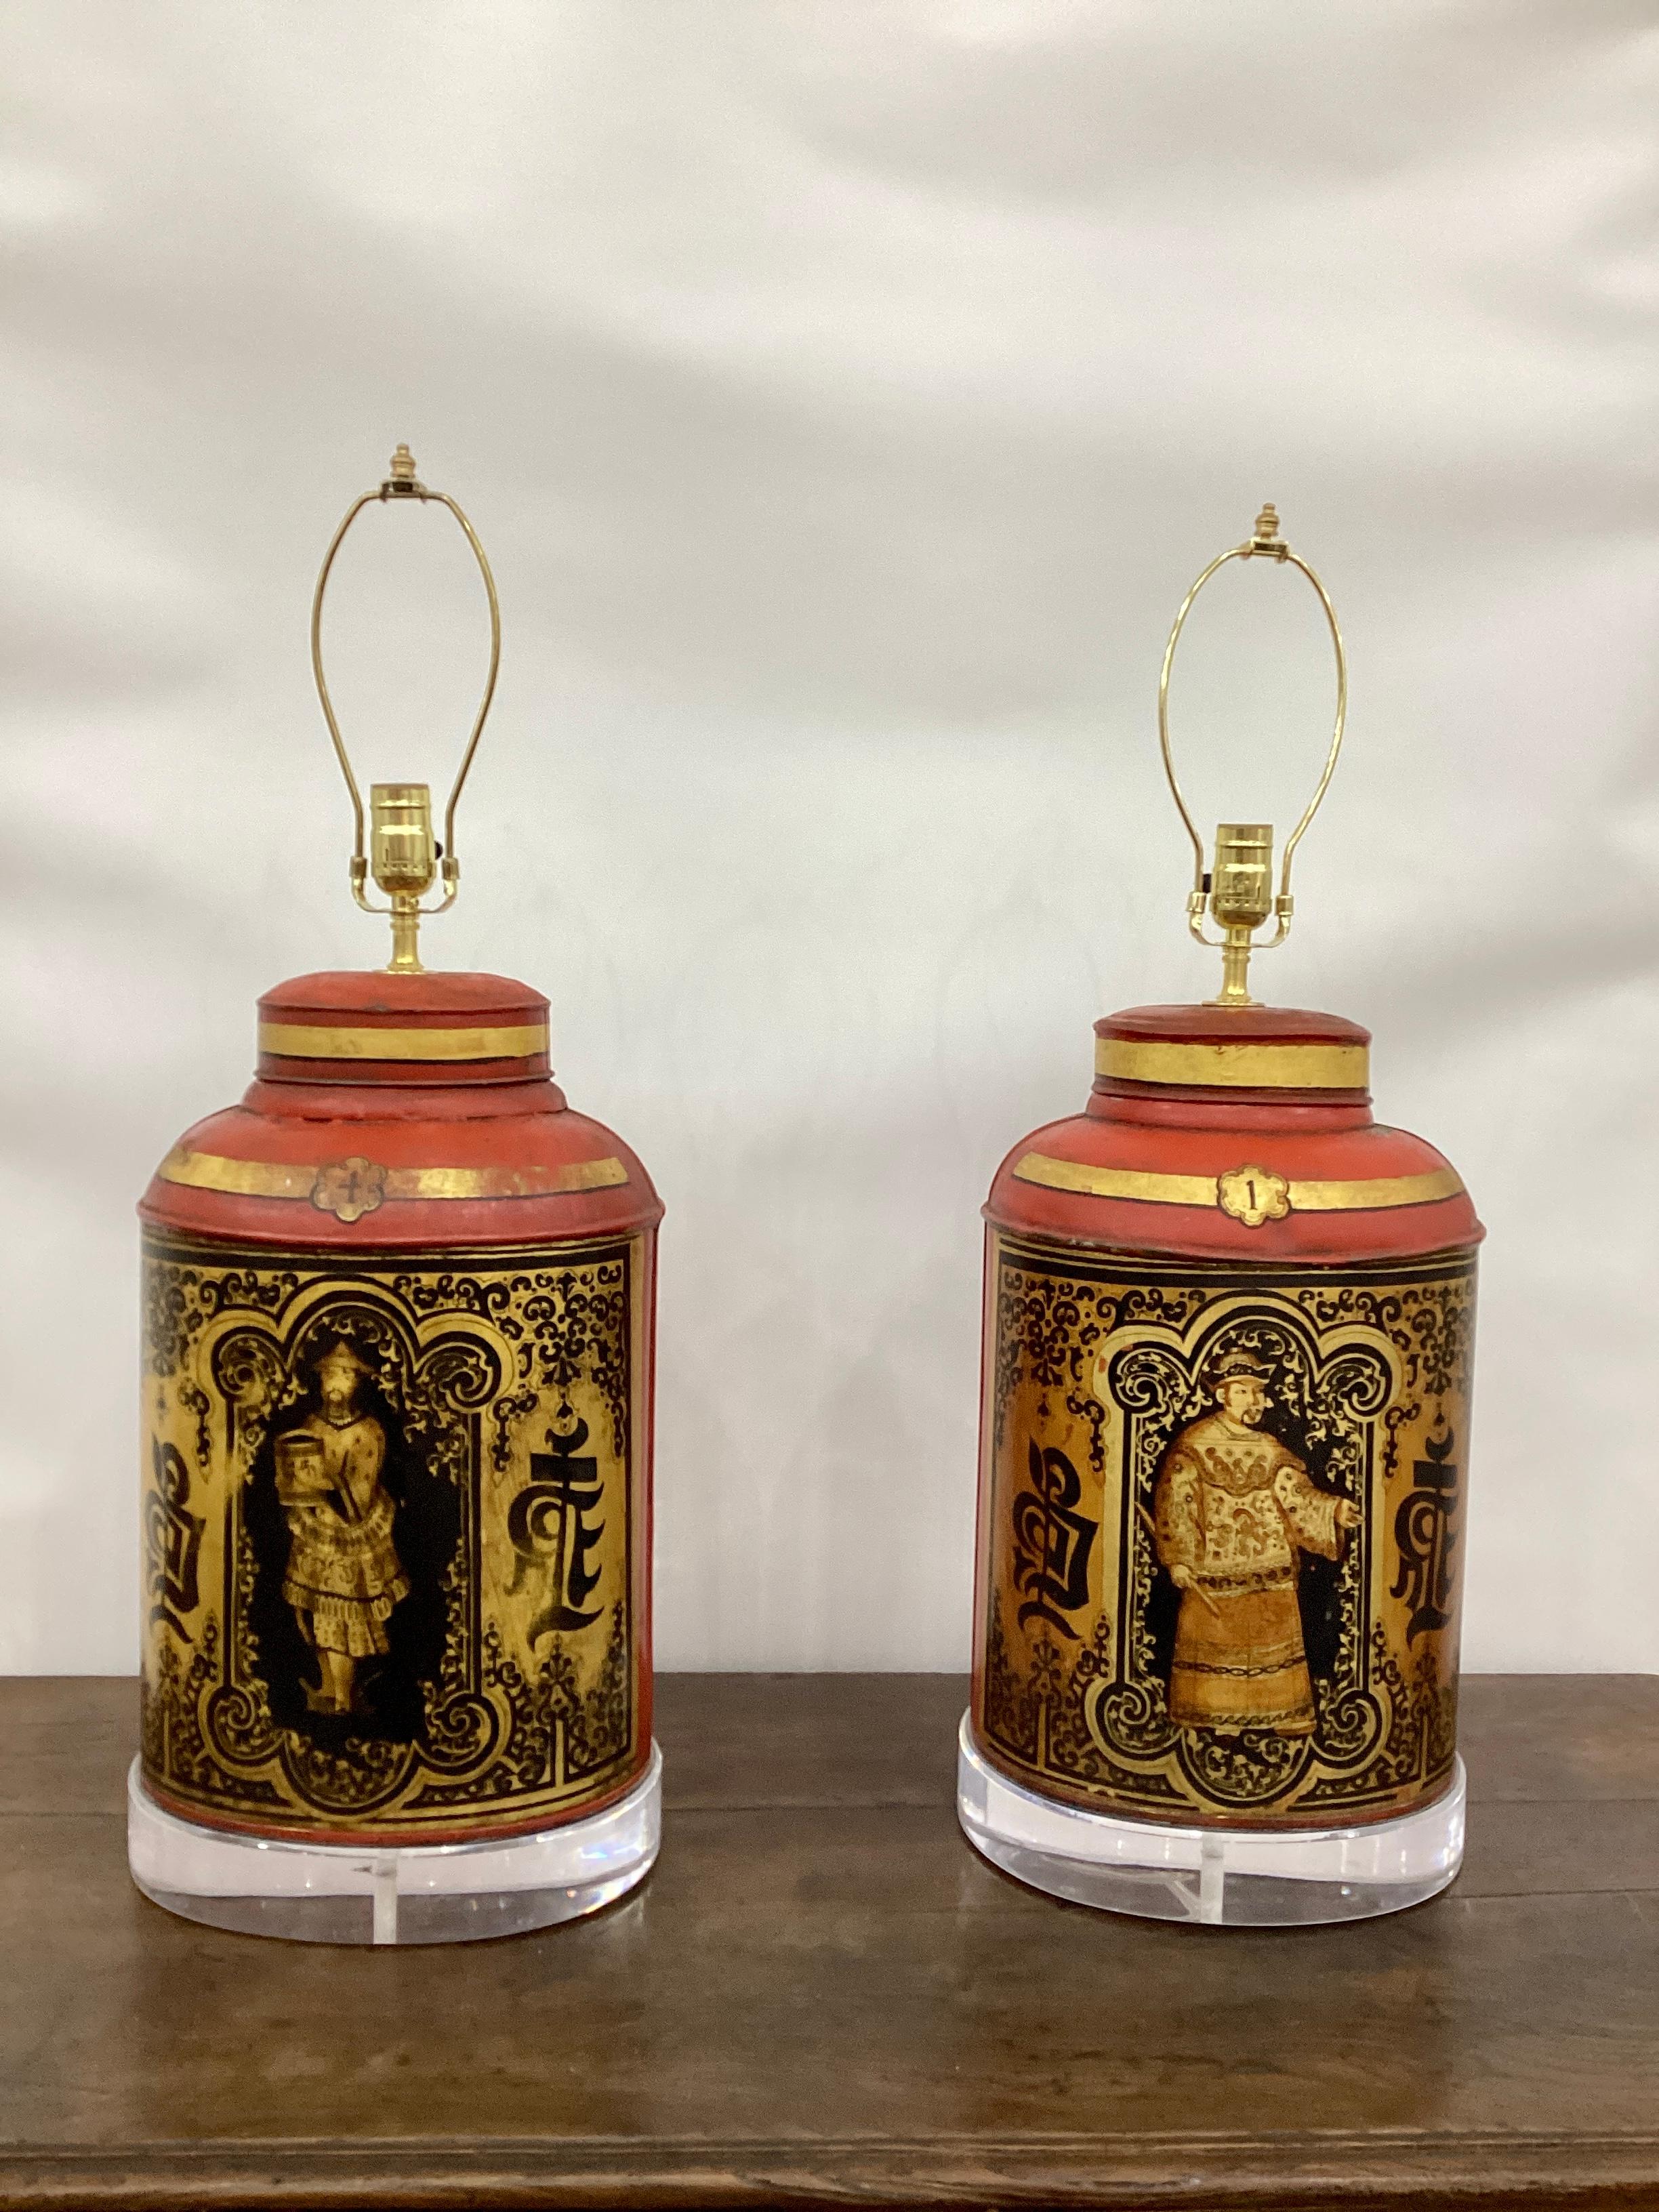 Pair of Antique English Red Tole and Gilt Tea Canister Lamps on Lucite Bases For Sale 4